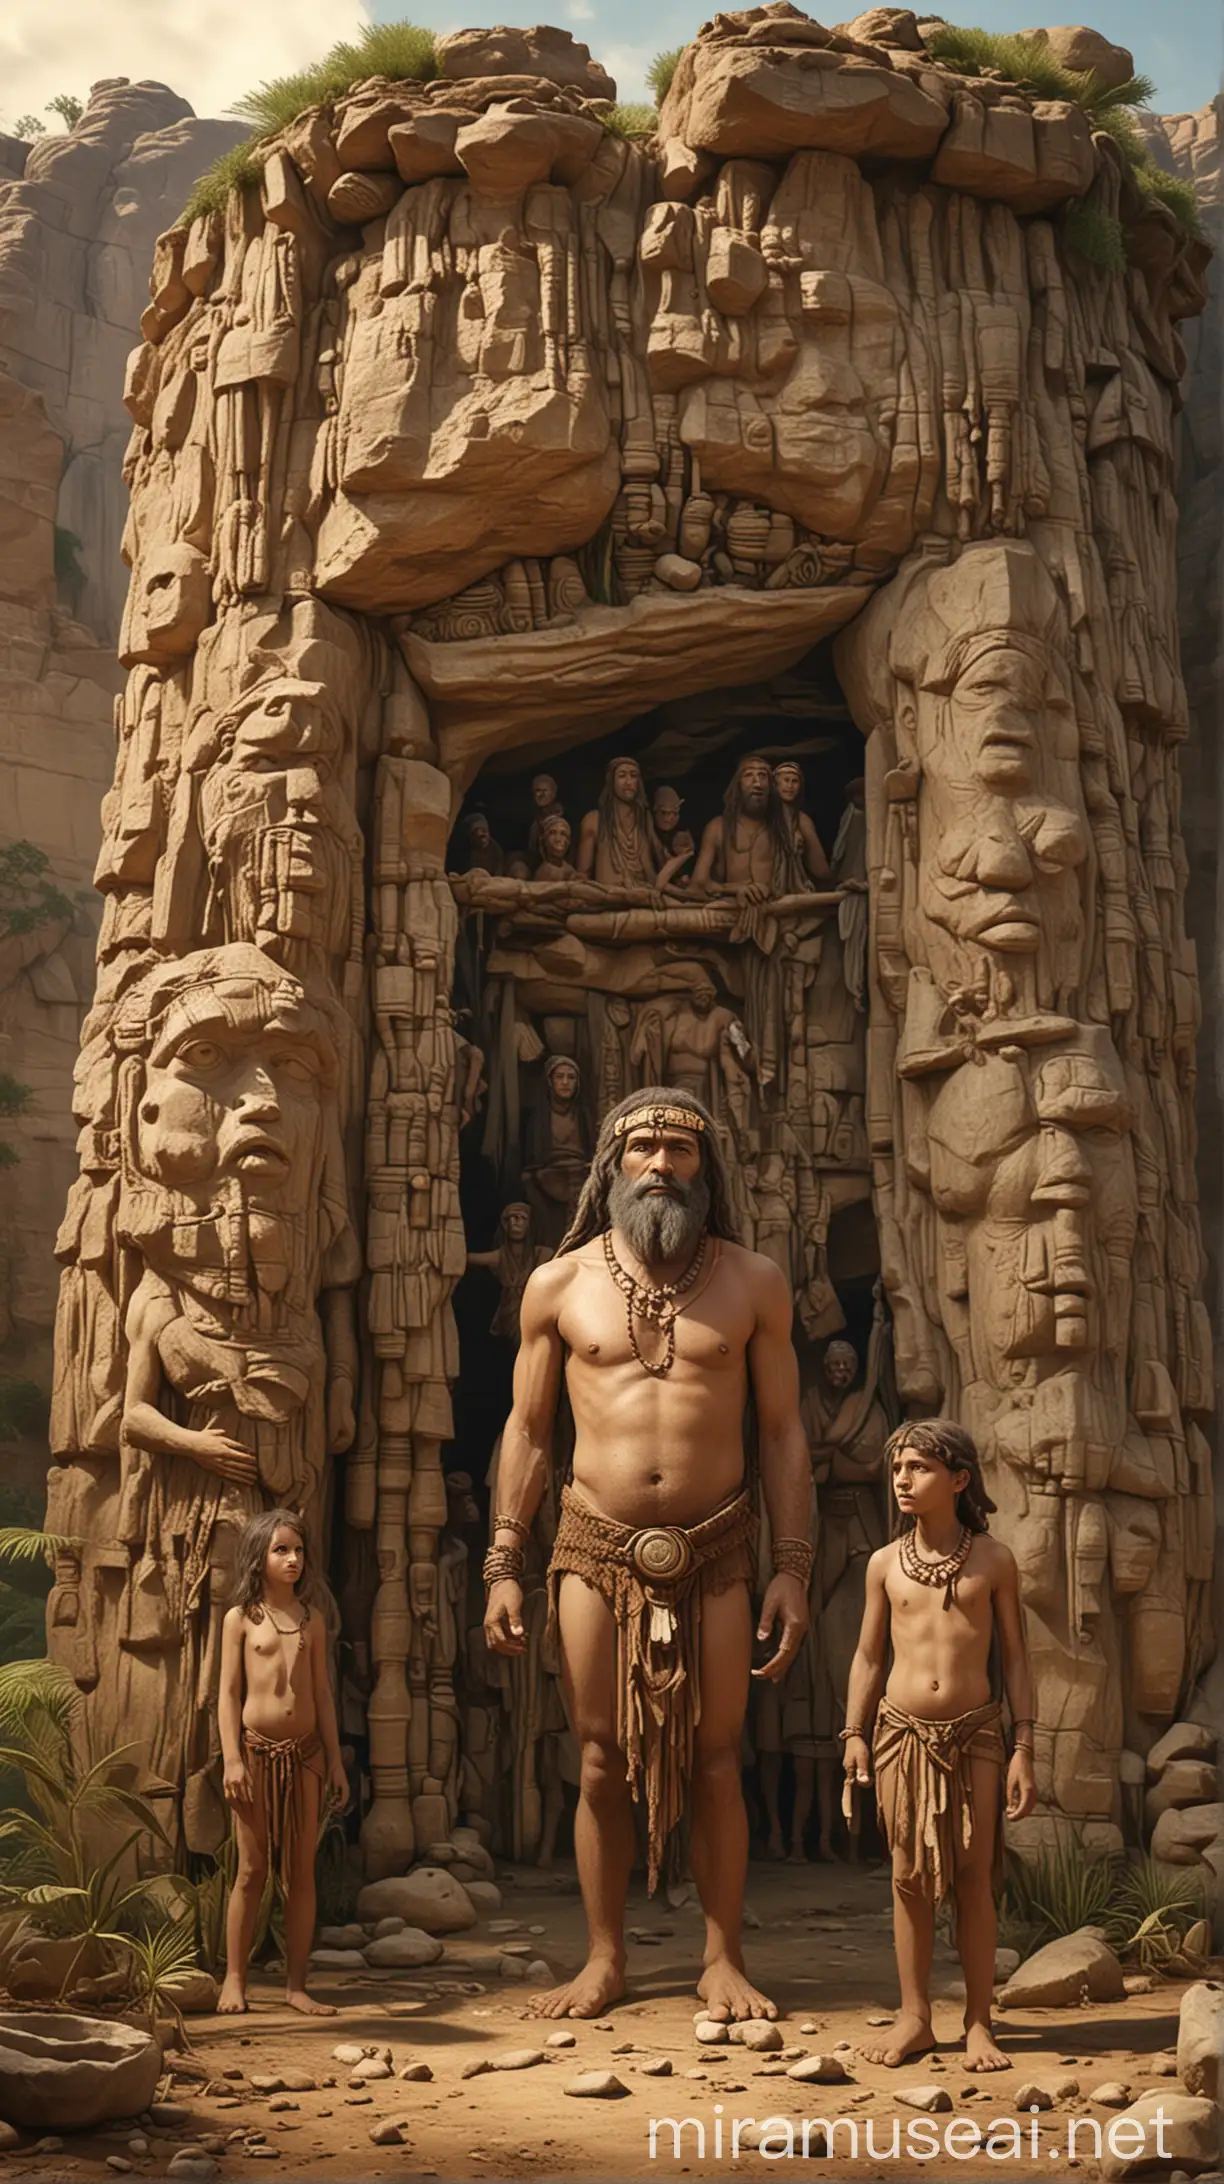 "A prehistoric setting with Jubal, depicted as a wise and ancient figure, standing with his parents, Lamech and Adah. Surrounding them is an early human community, showing a connection to their lineage."In ancient world 